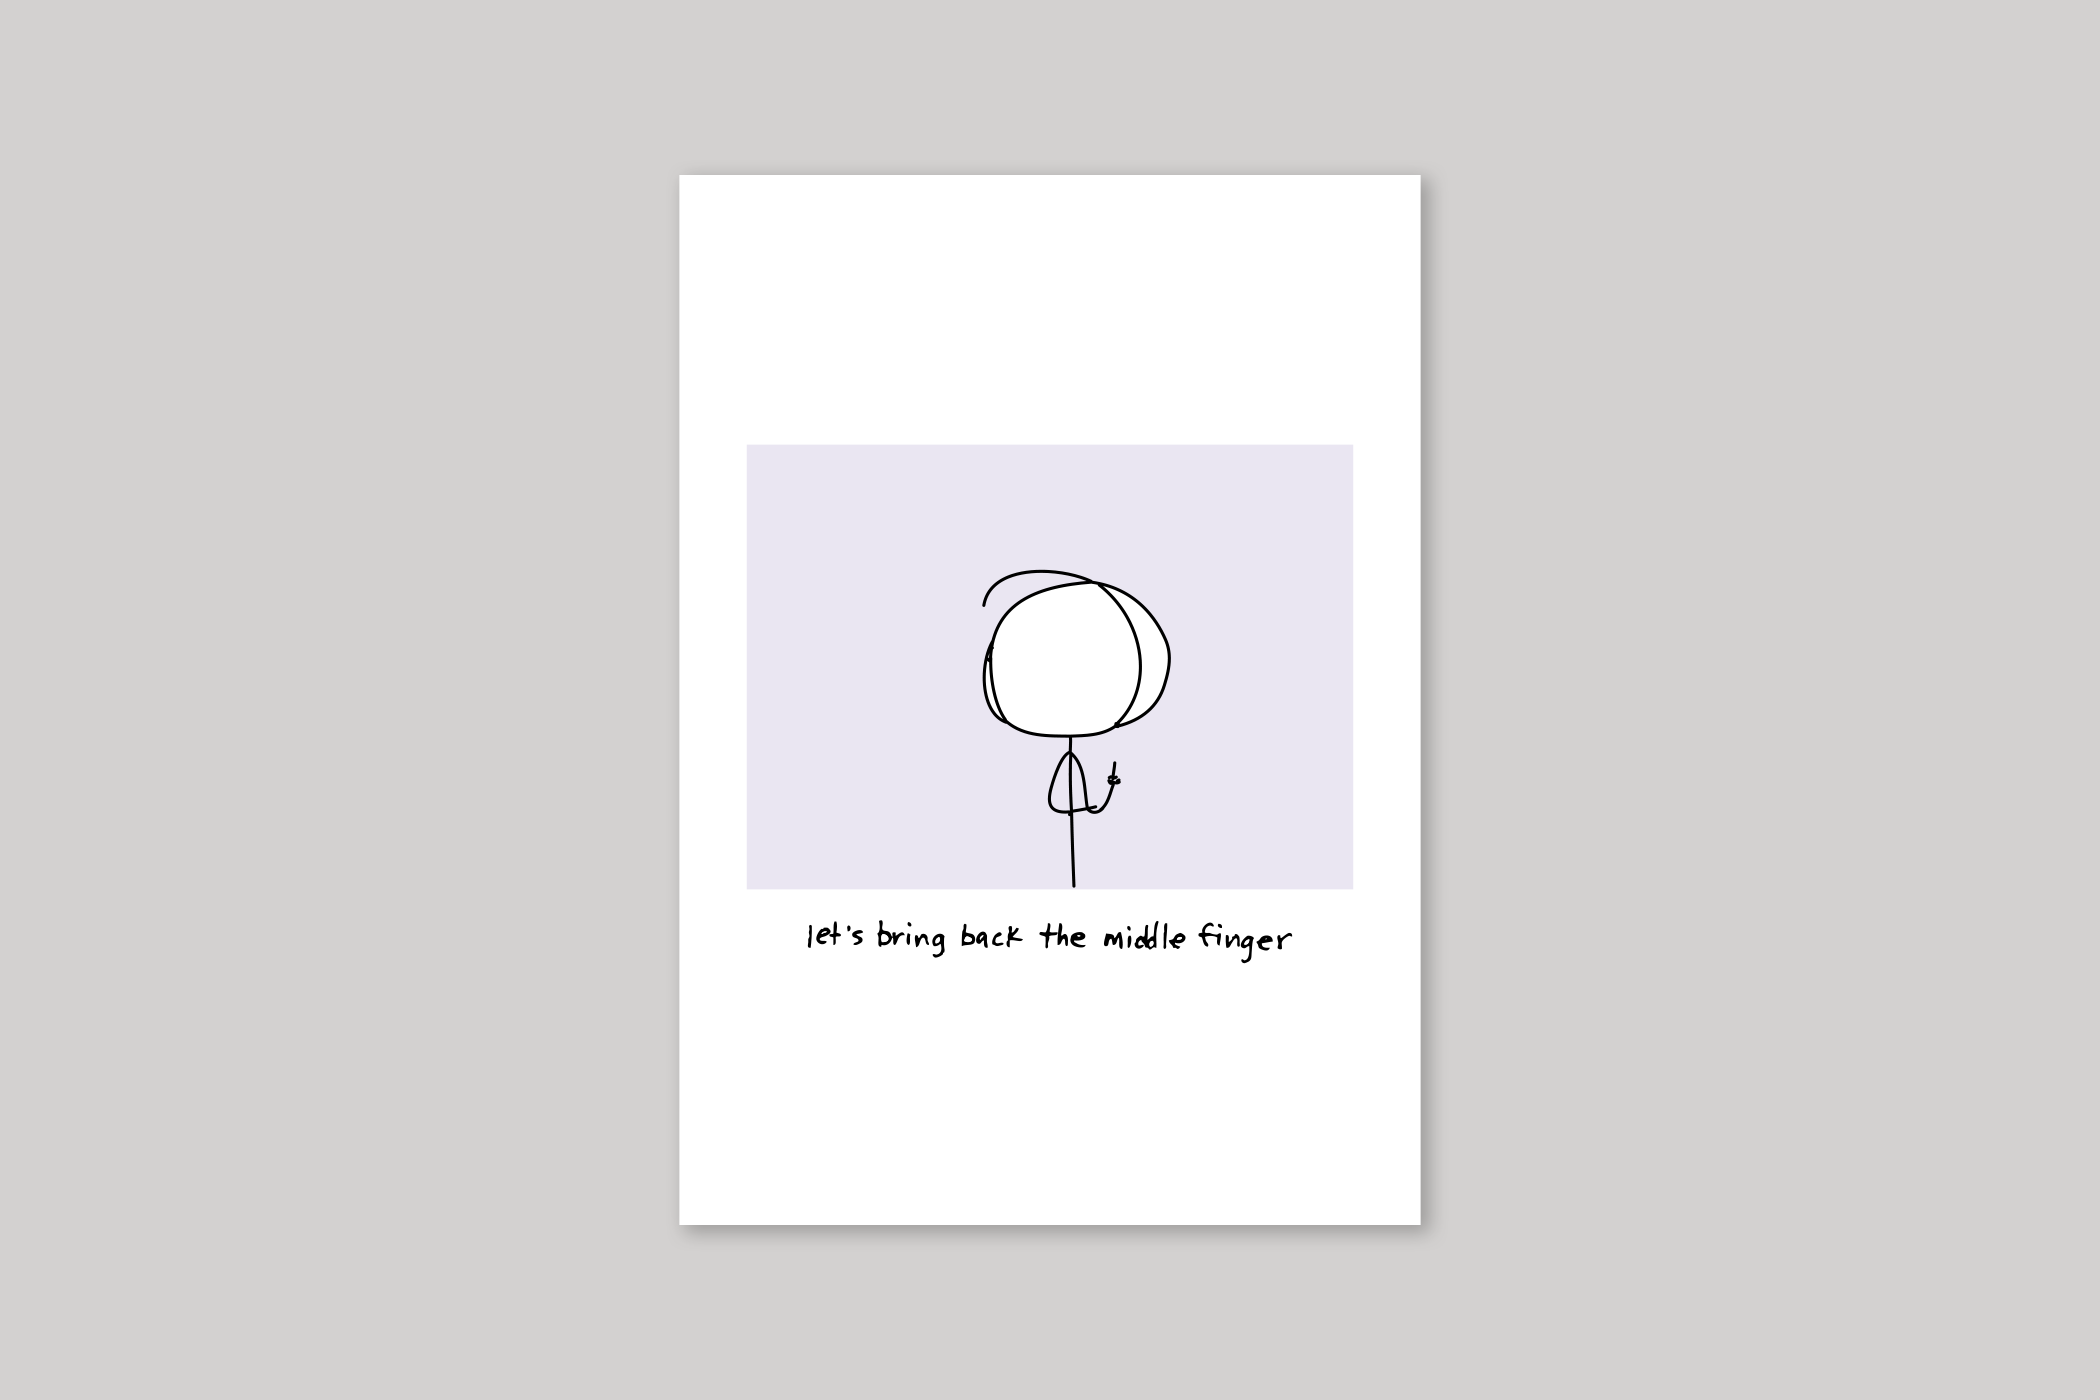 Middle Finger humorous illustration from Mean Cards range of greeting cards by Icon.